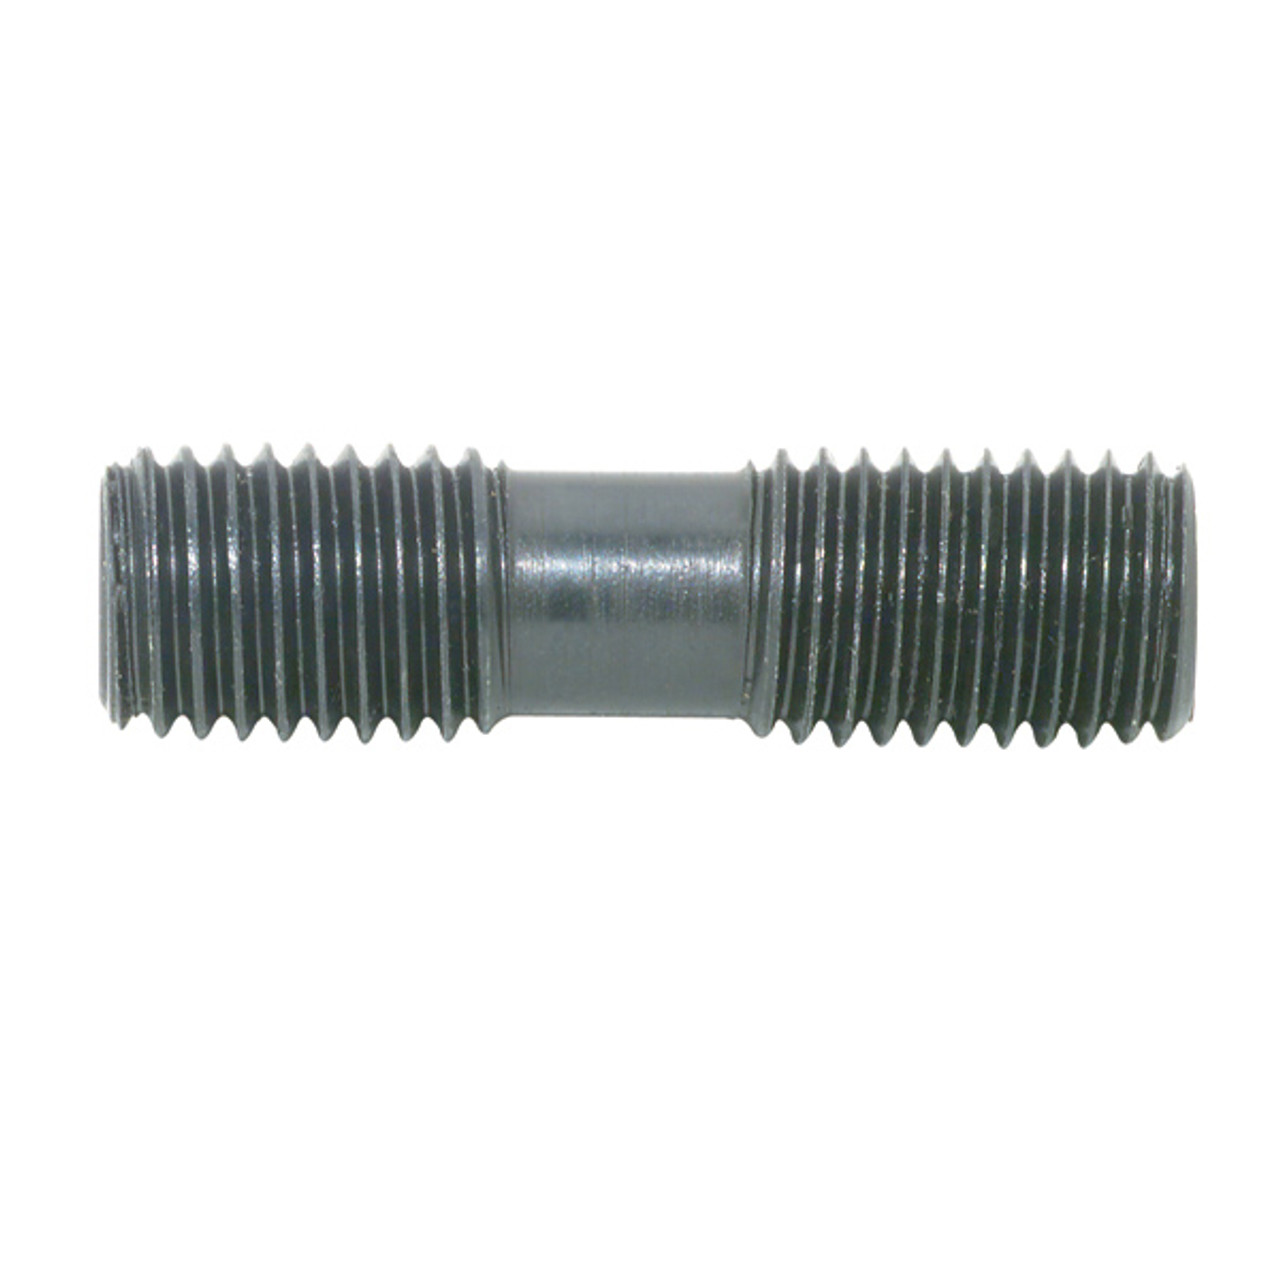 55-920-112      XNS36 DIFFERENTIAL SCREW